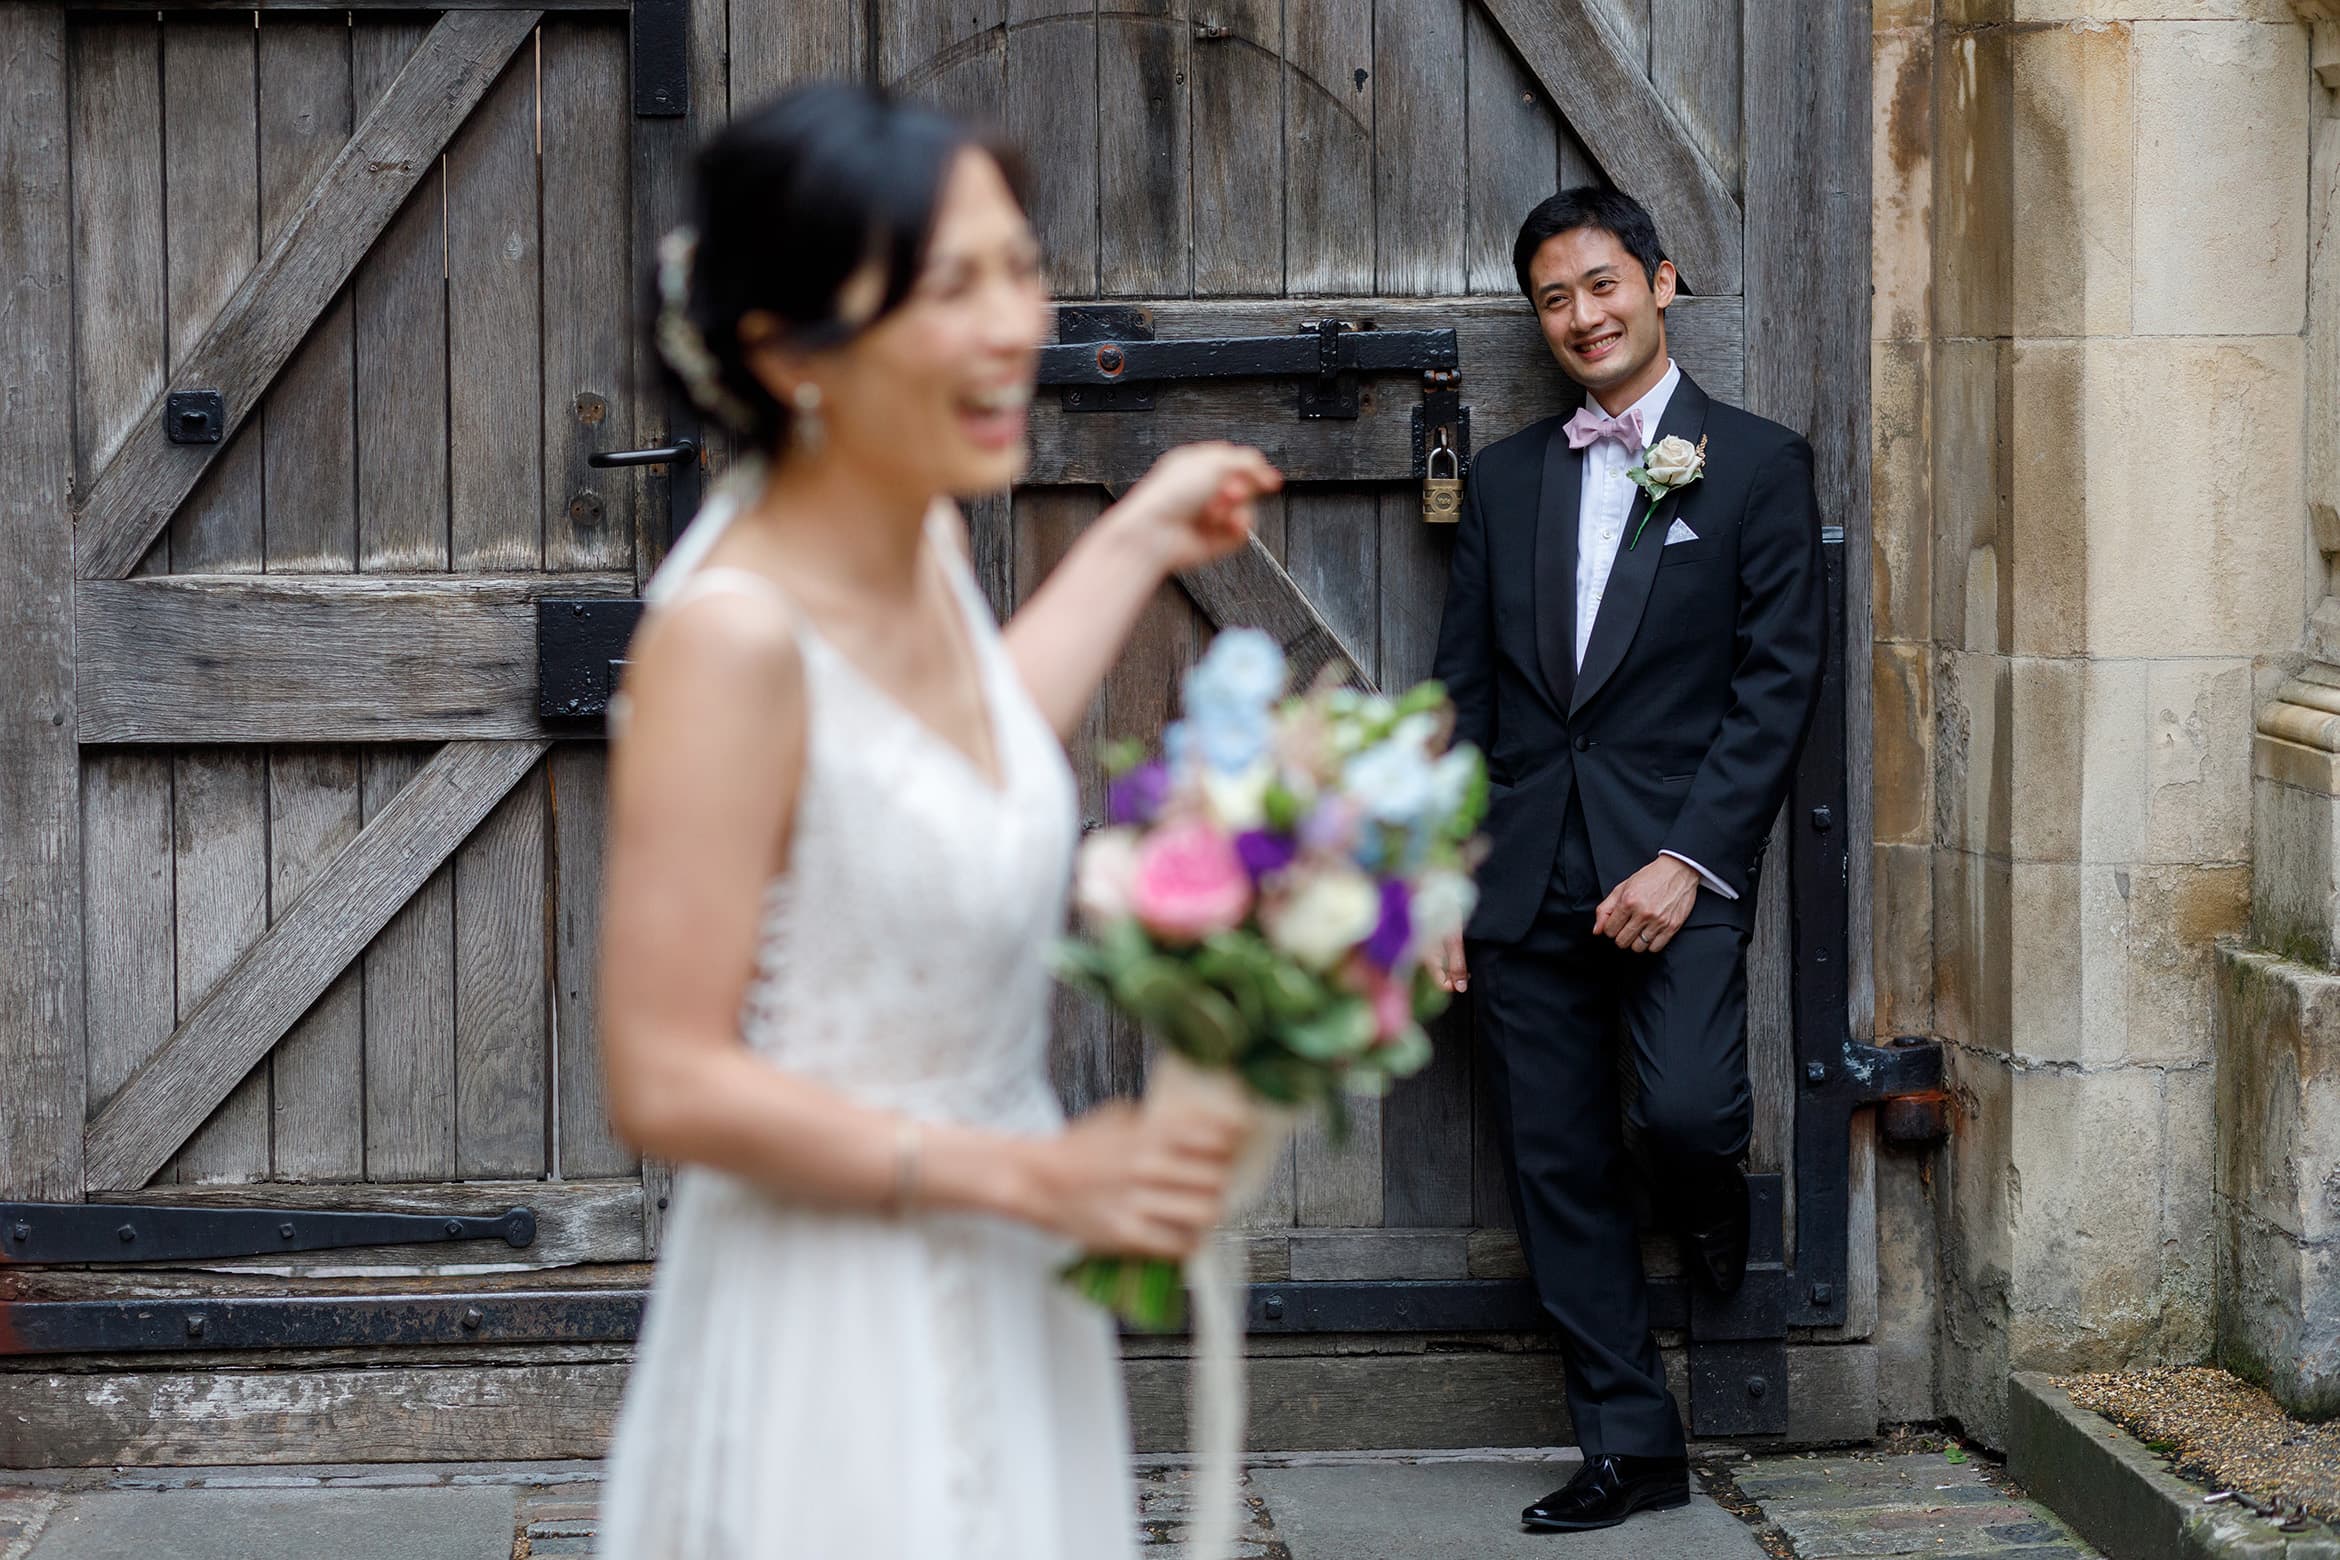 the bride laughs at the groom